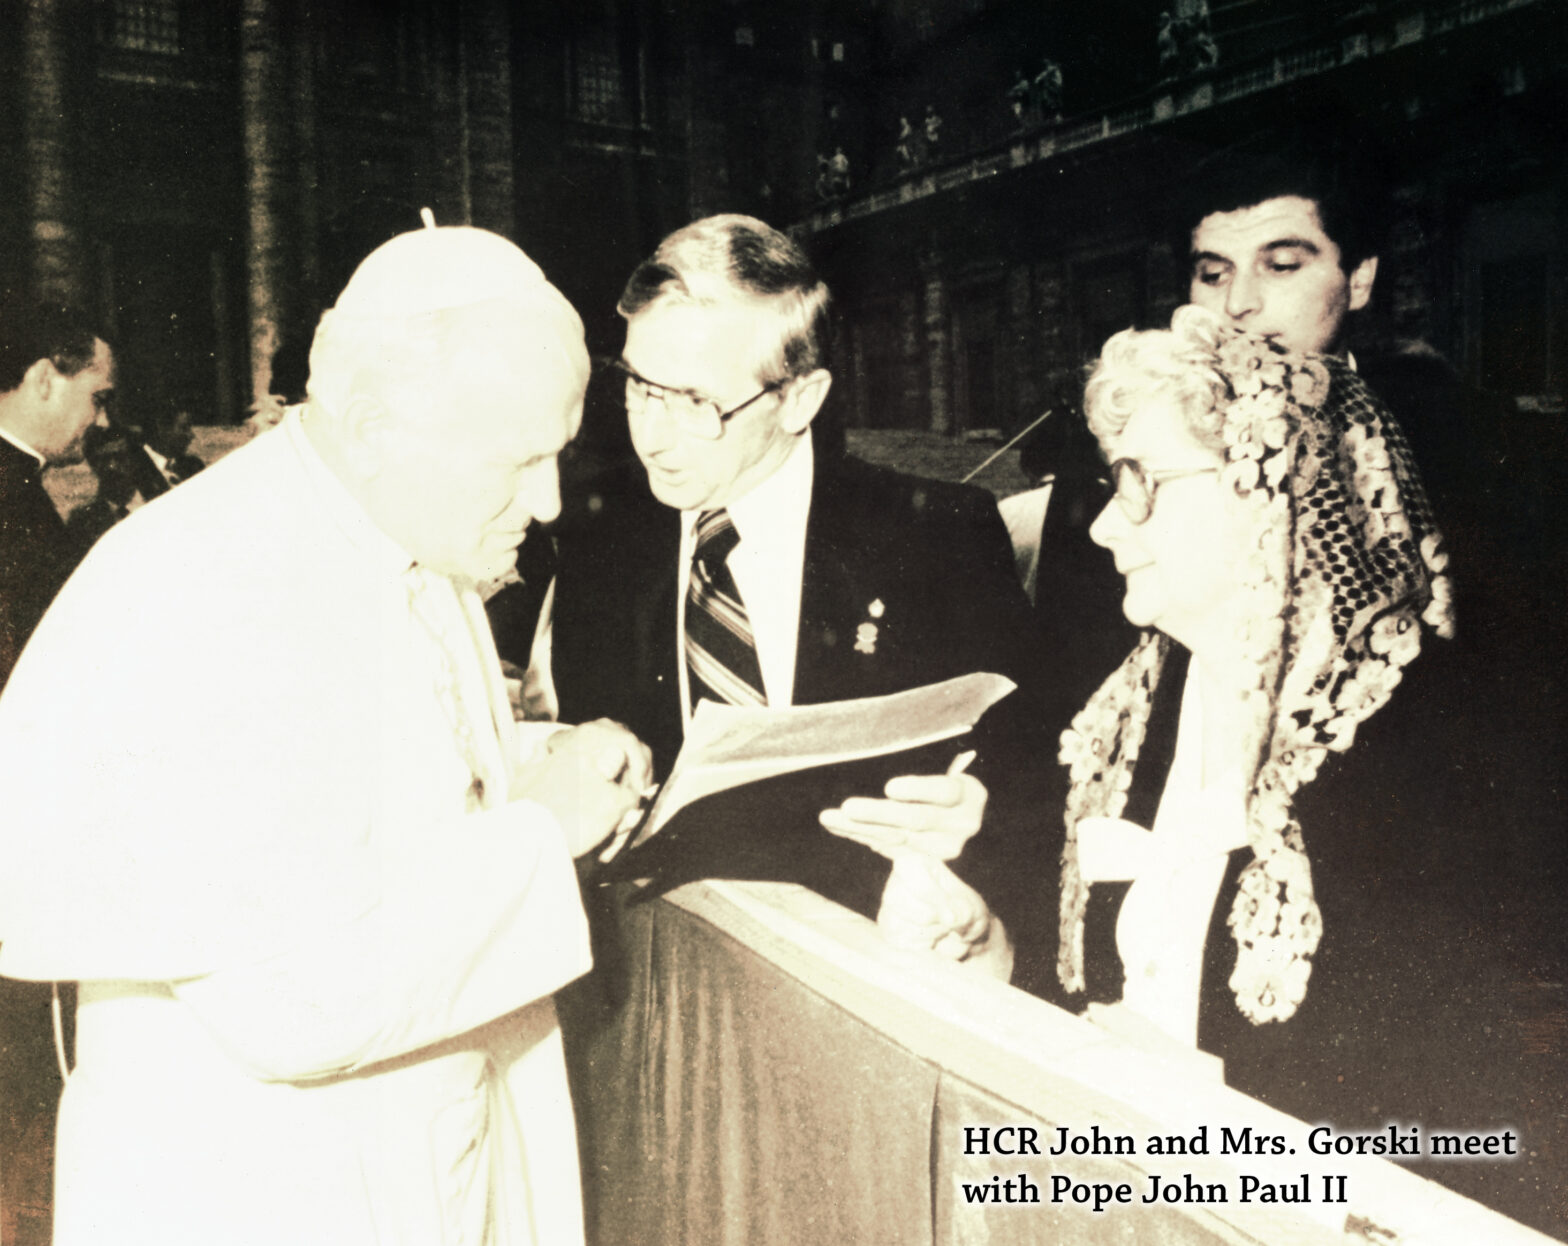 Catholic Order of Foresters meets Pope John Paul II.